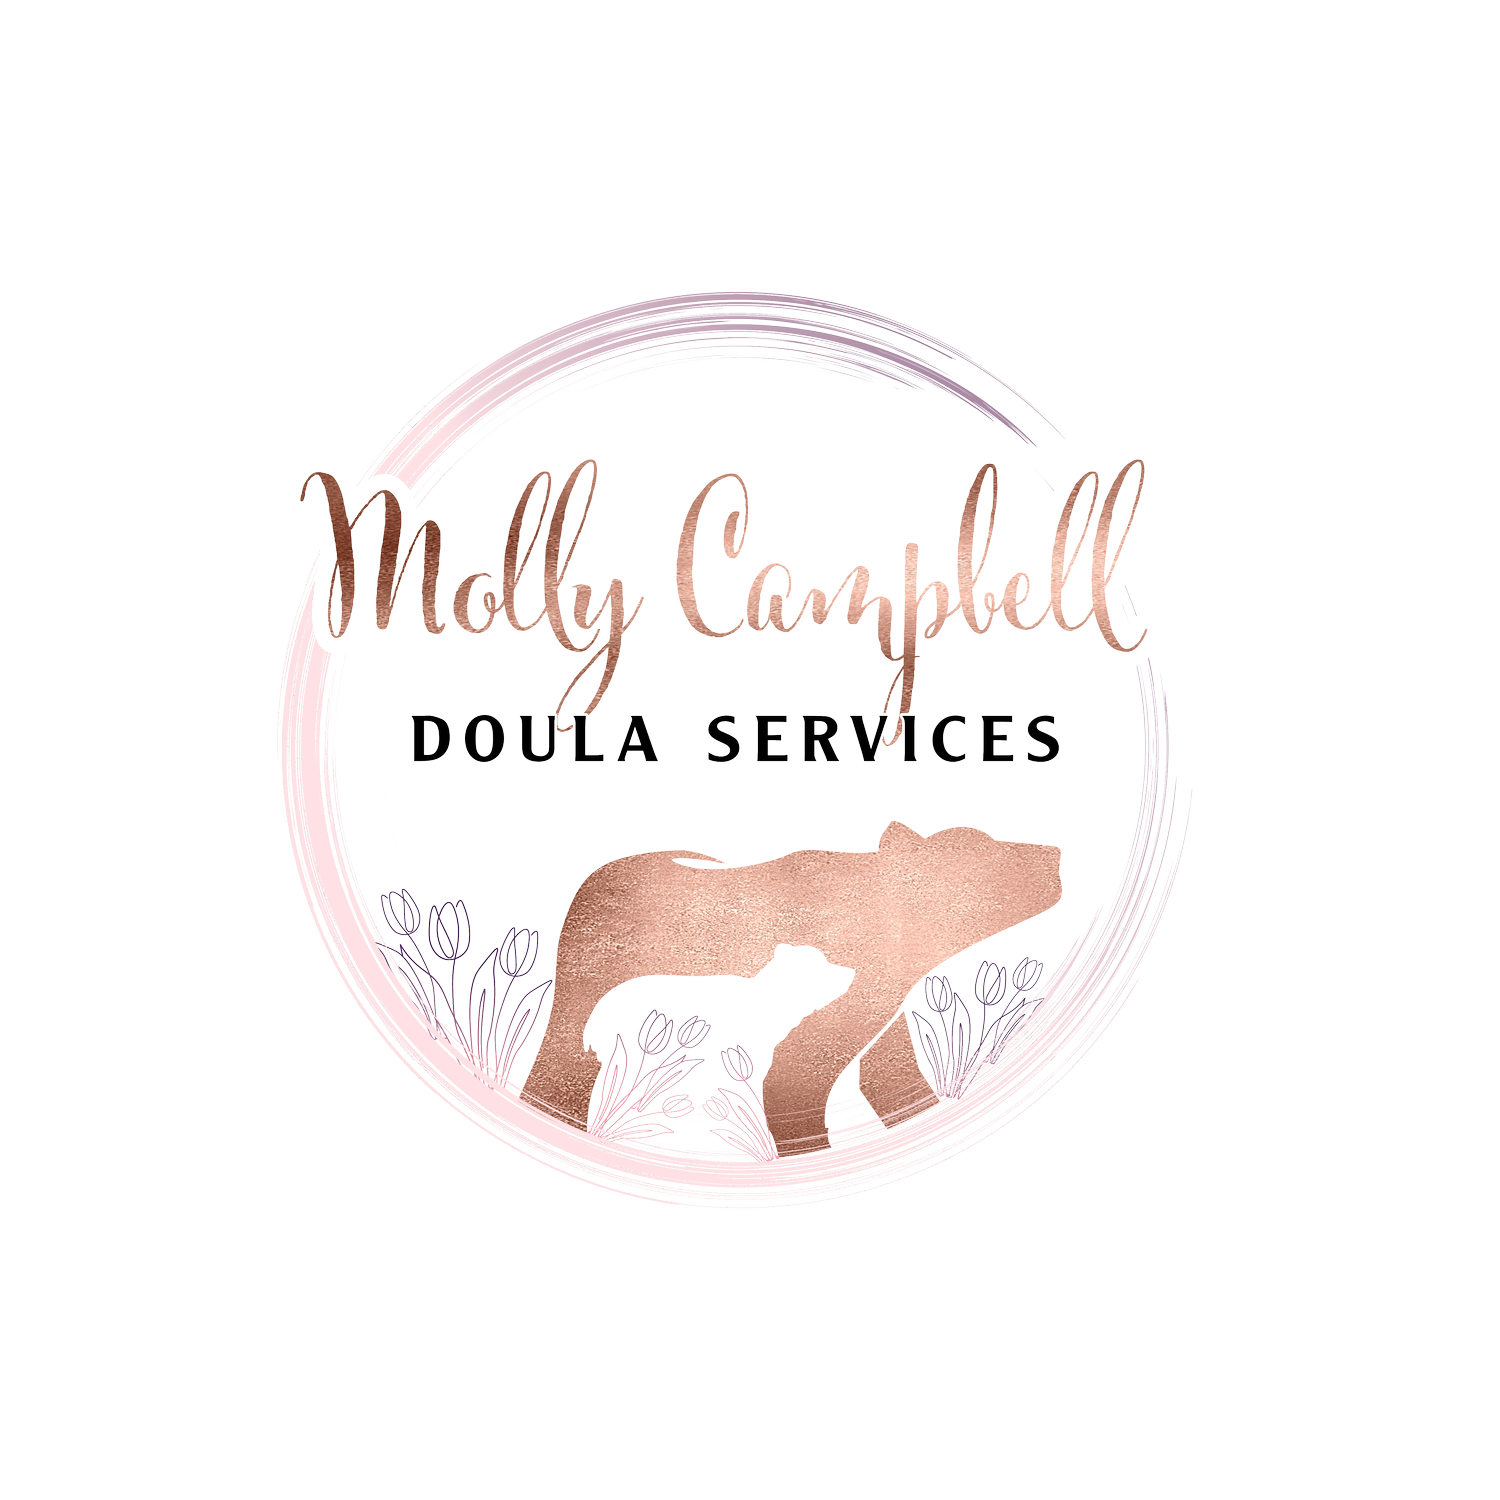 Molly Campbell Doula Services